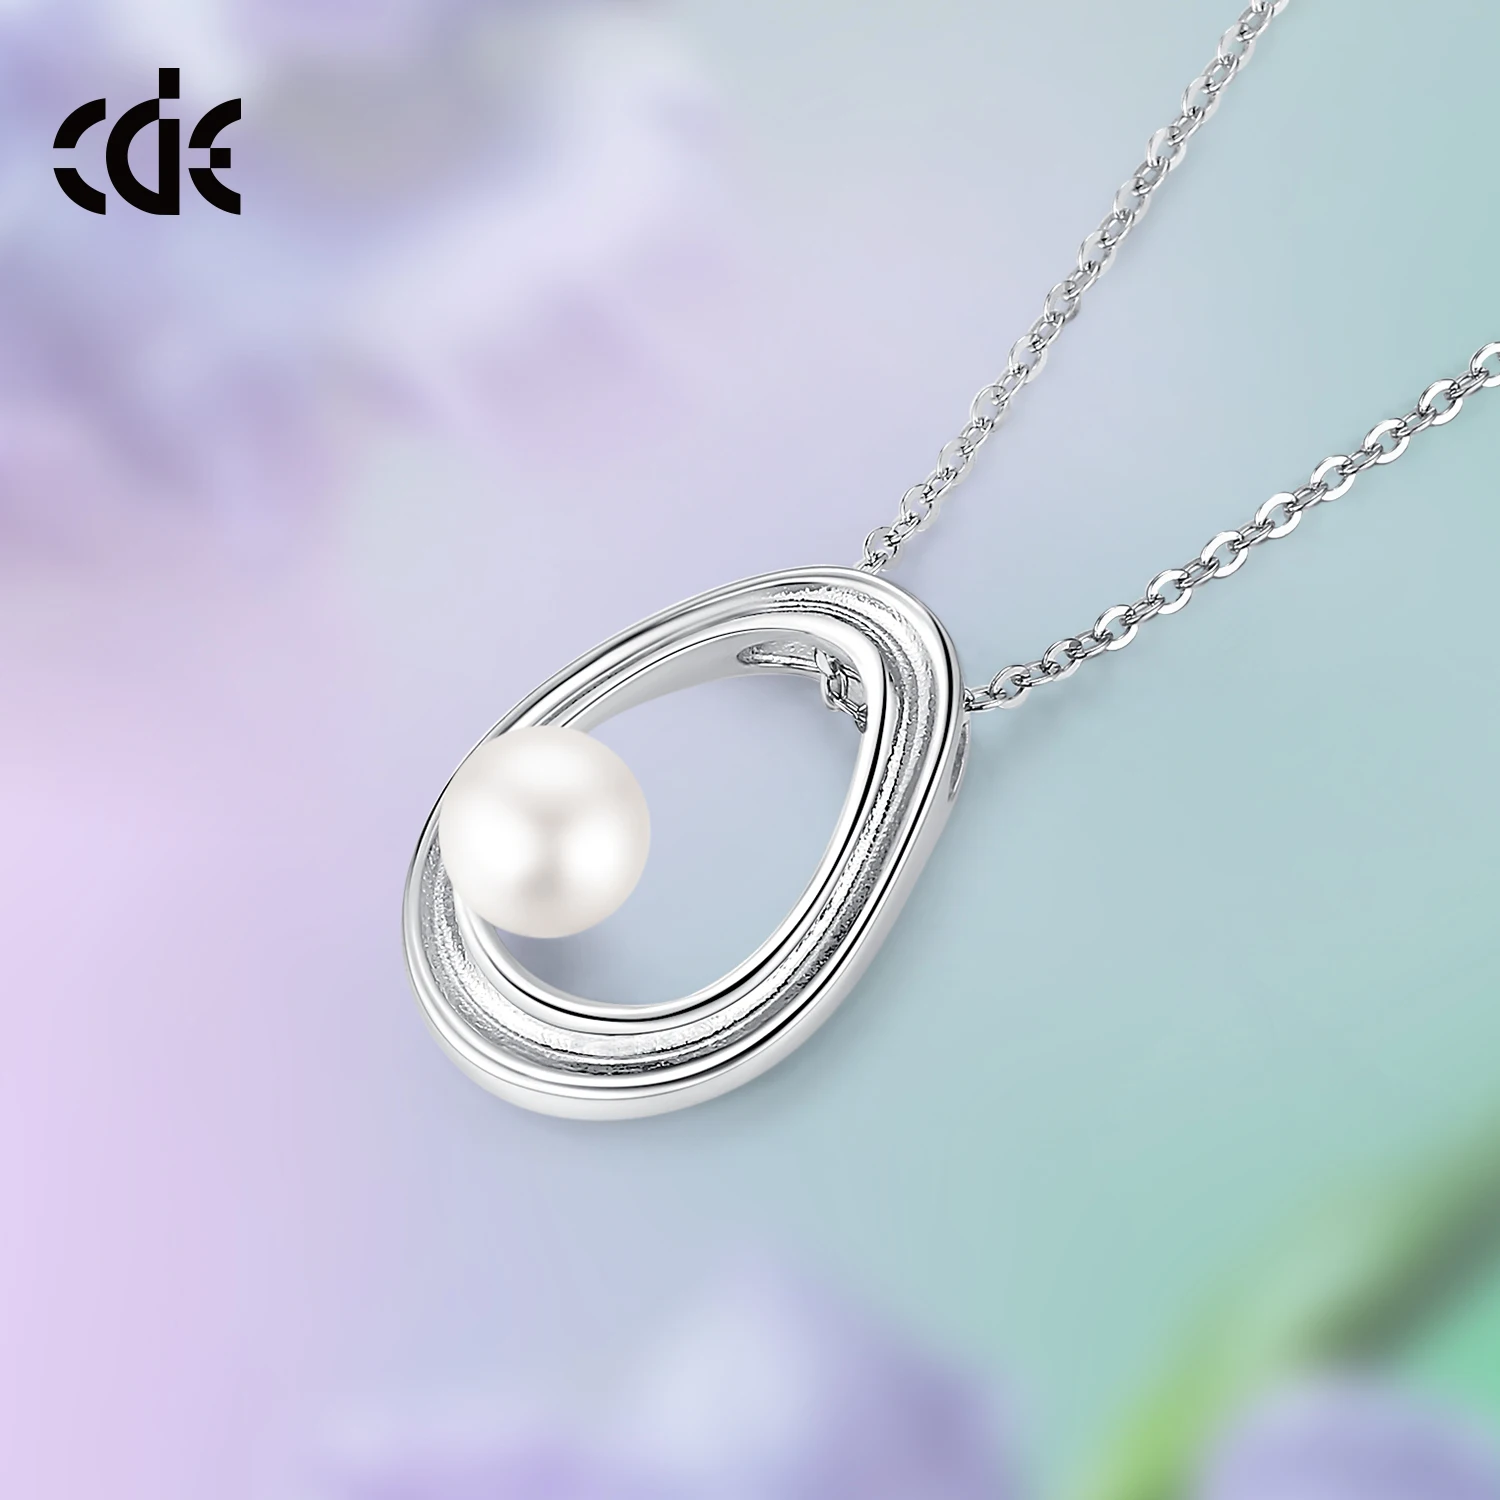 CDE YP1660 Minimalist Jewelry 925 Sterling Silver Necklace With Fresh Water Pearl 2023 Rohodium Plated DIY Pearl Necklace